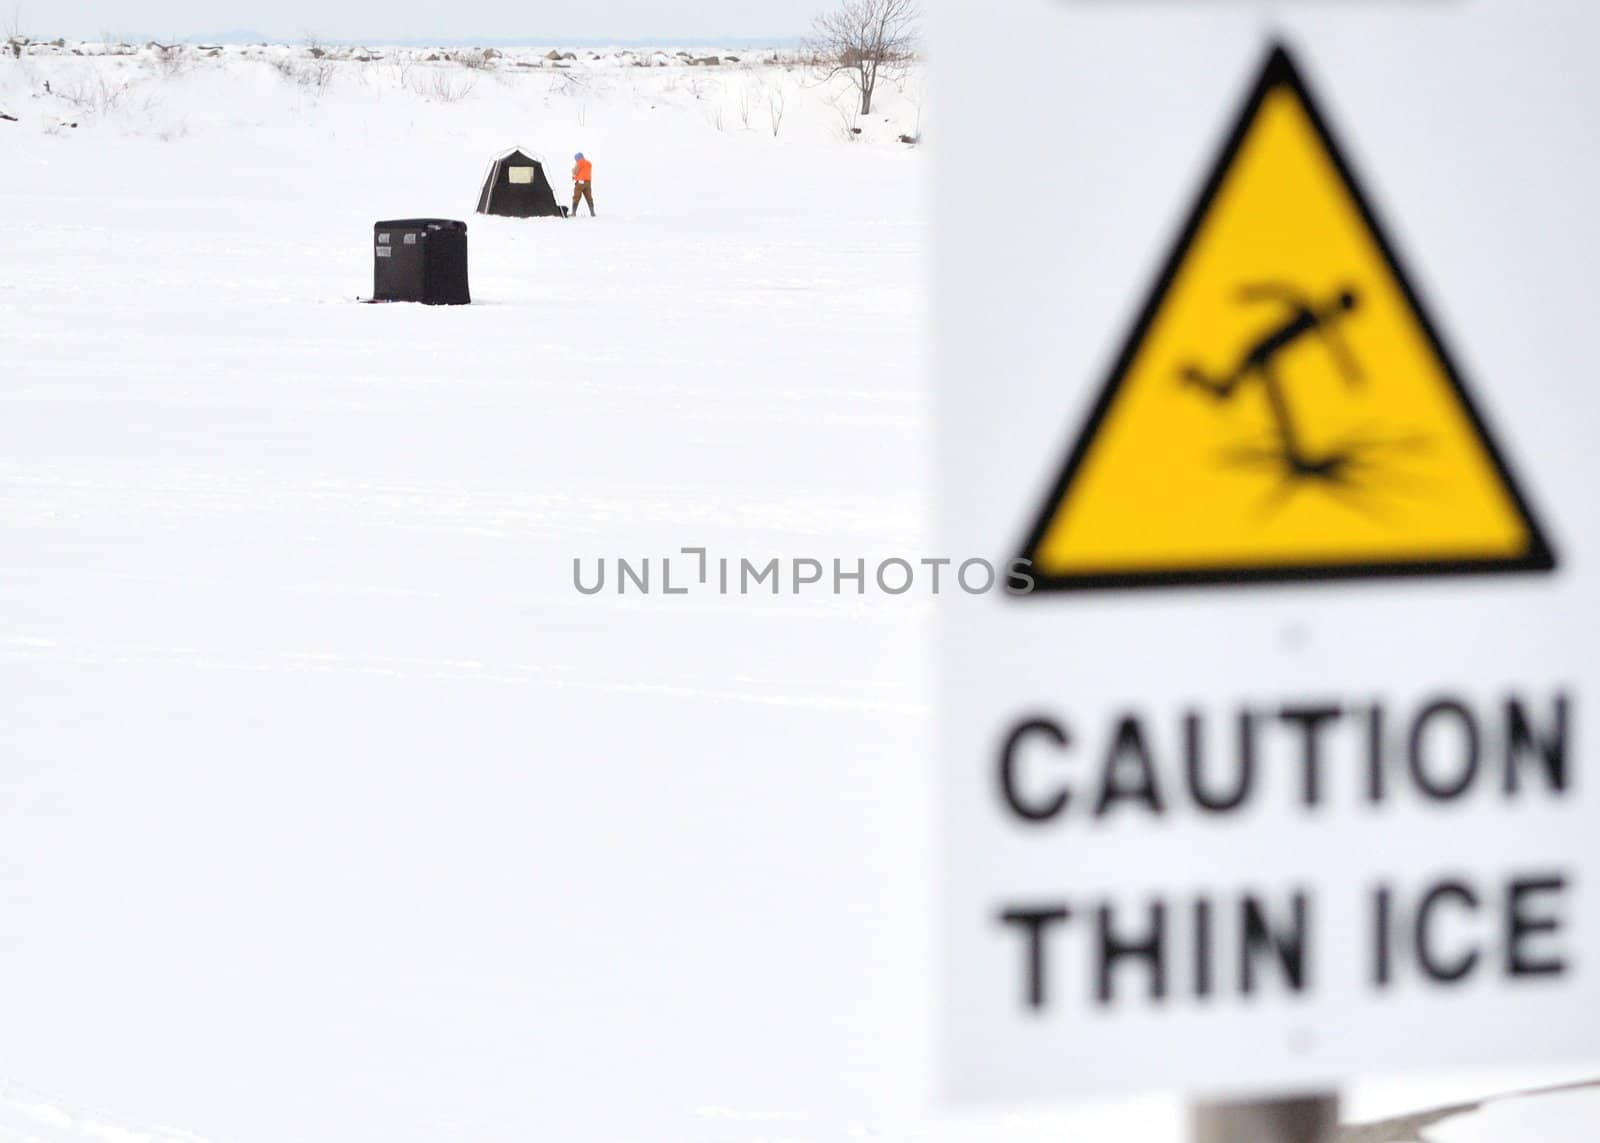 Thin Ice Warning Sign by brm1949